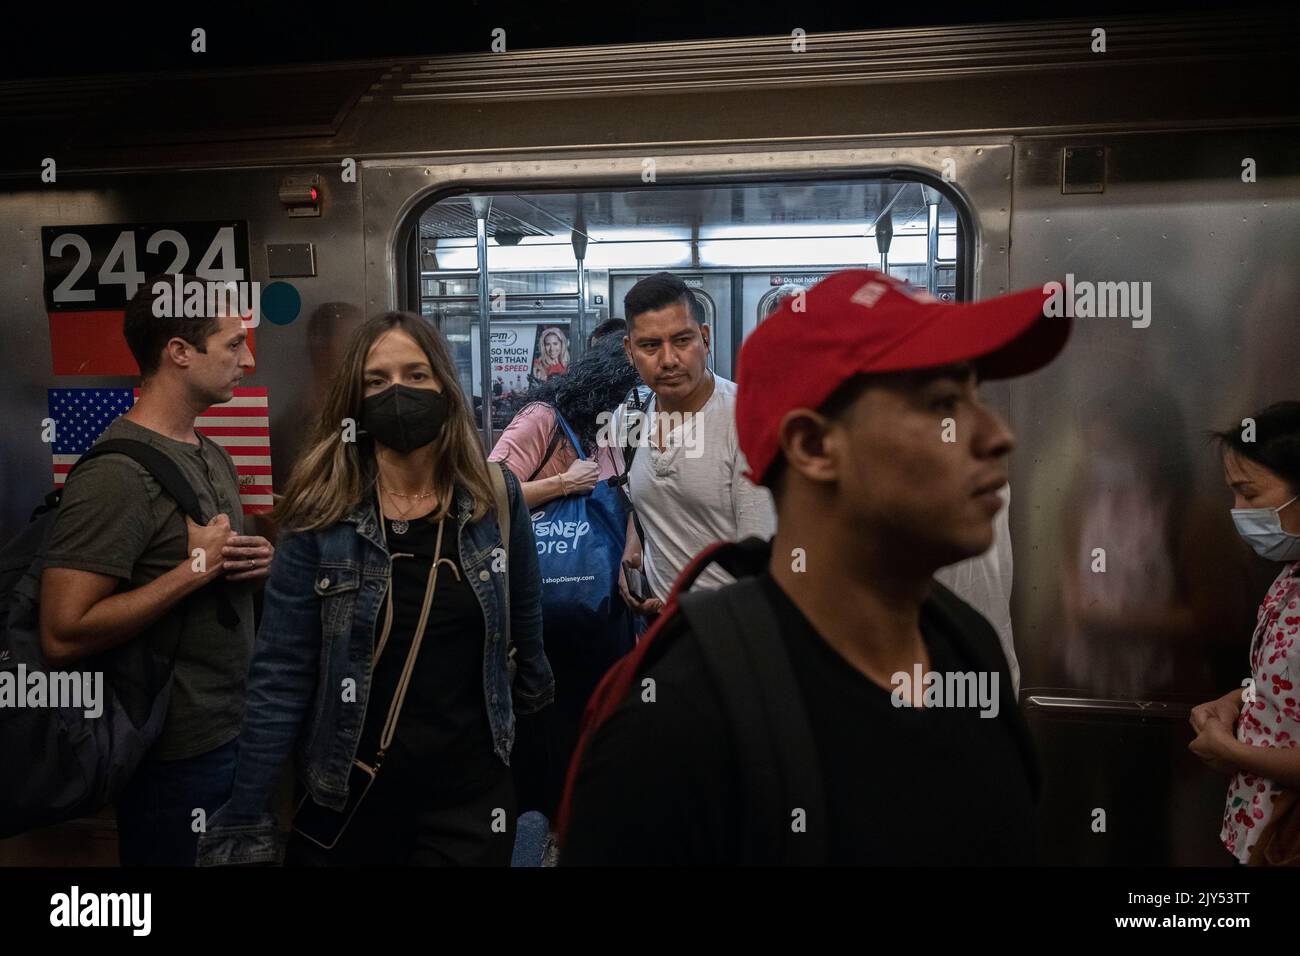 New York, New York, USA 7 September 2022 Riders with and without masks exit  1 train at Times Square hours after New York State Governor Kathy Hochul lifted pandemic mask requirement for New York transit riders Credit: Joseph Reid/Alamy Live News Stock Photo